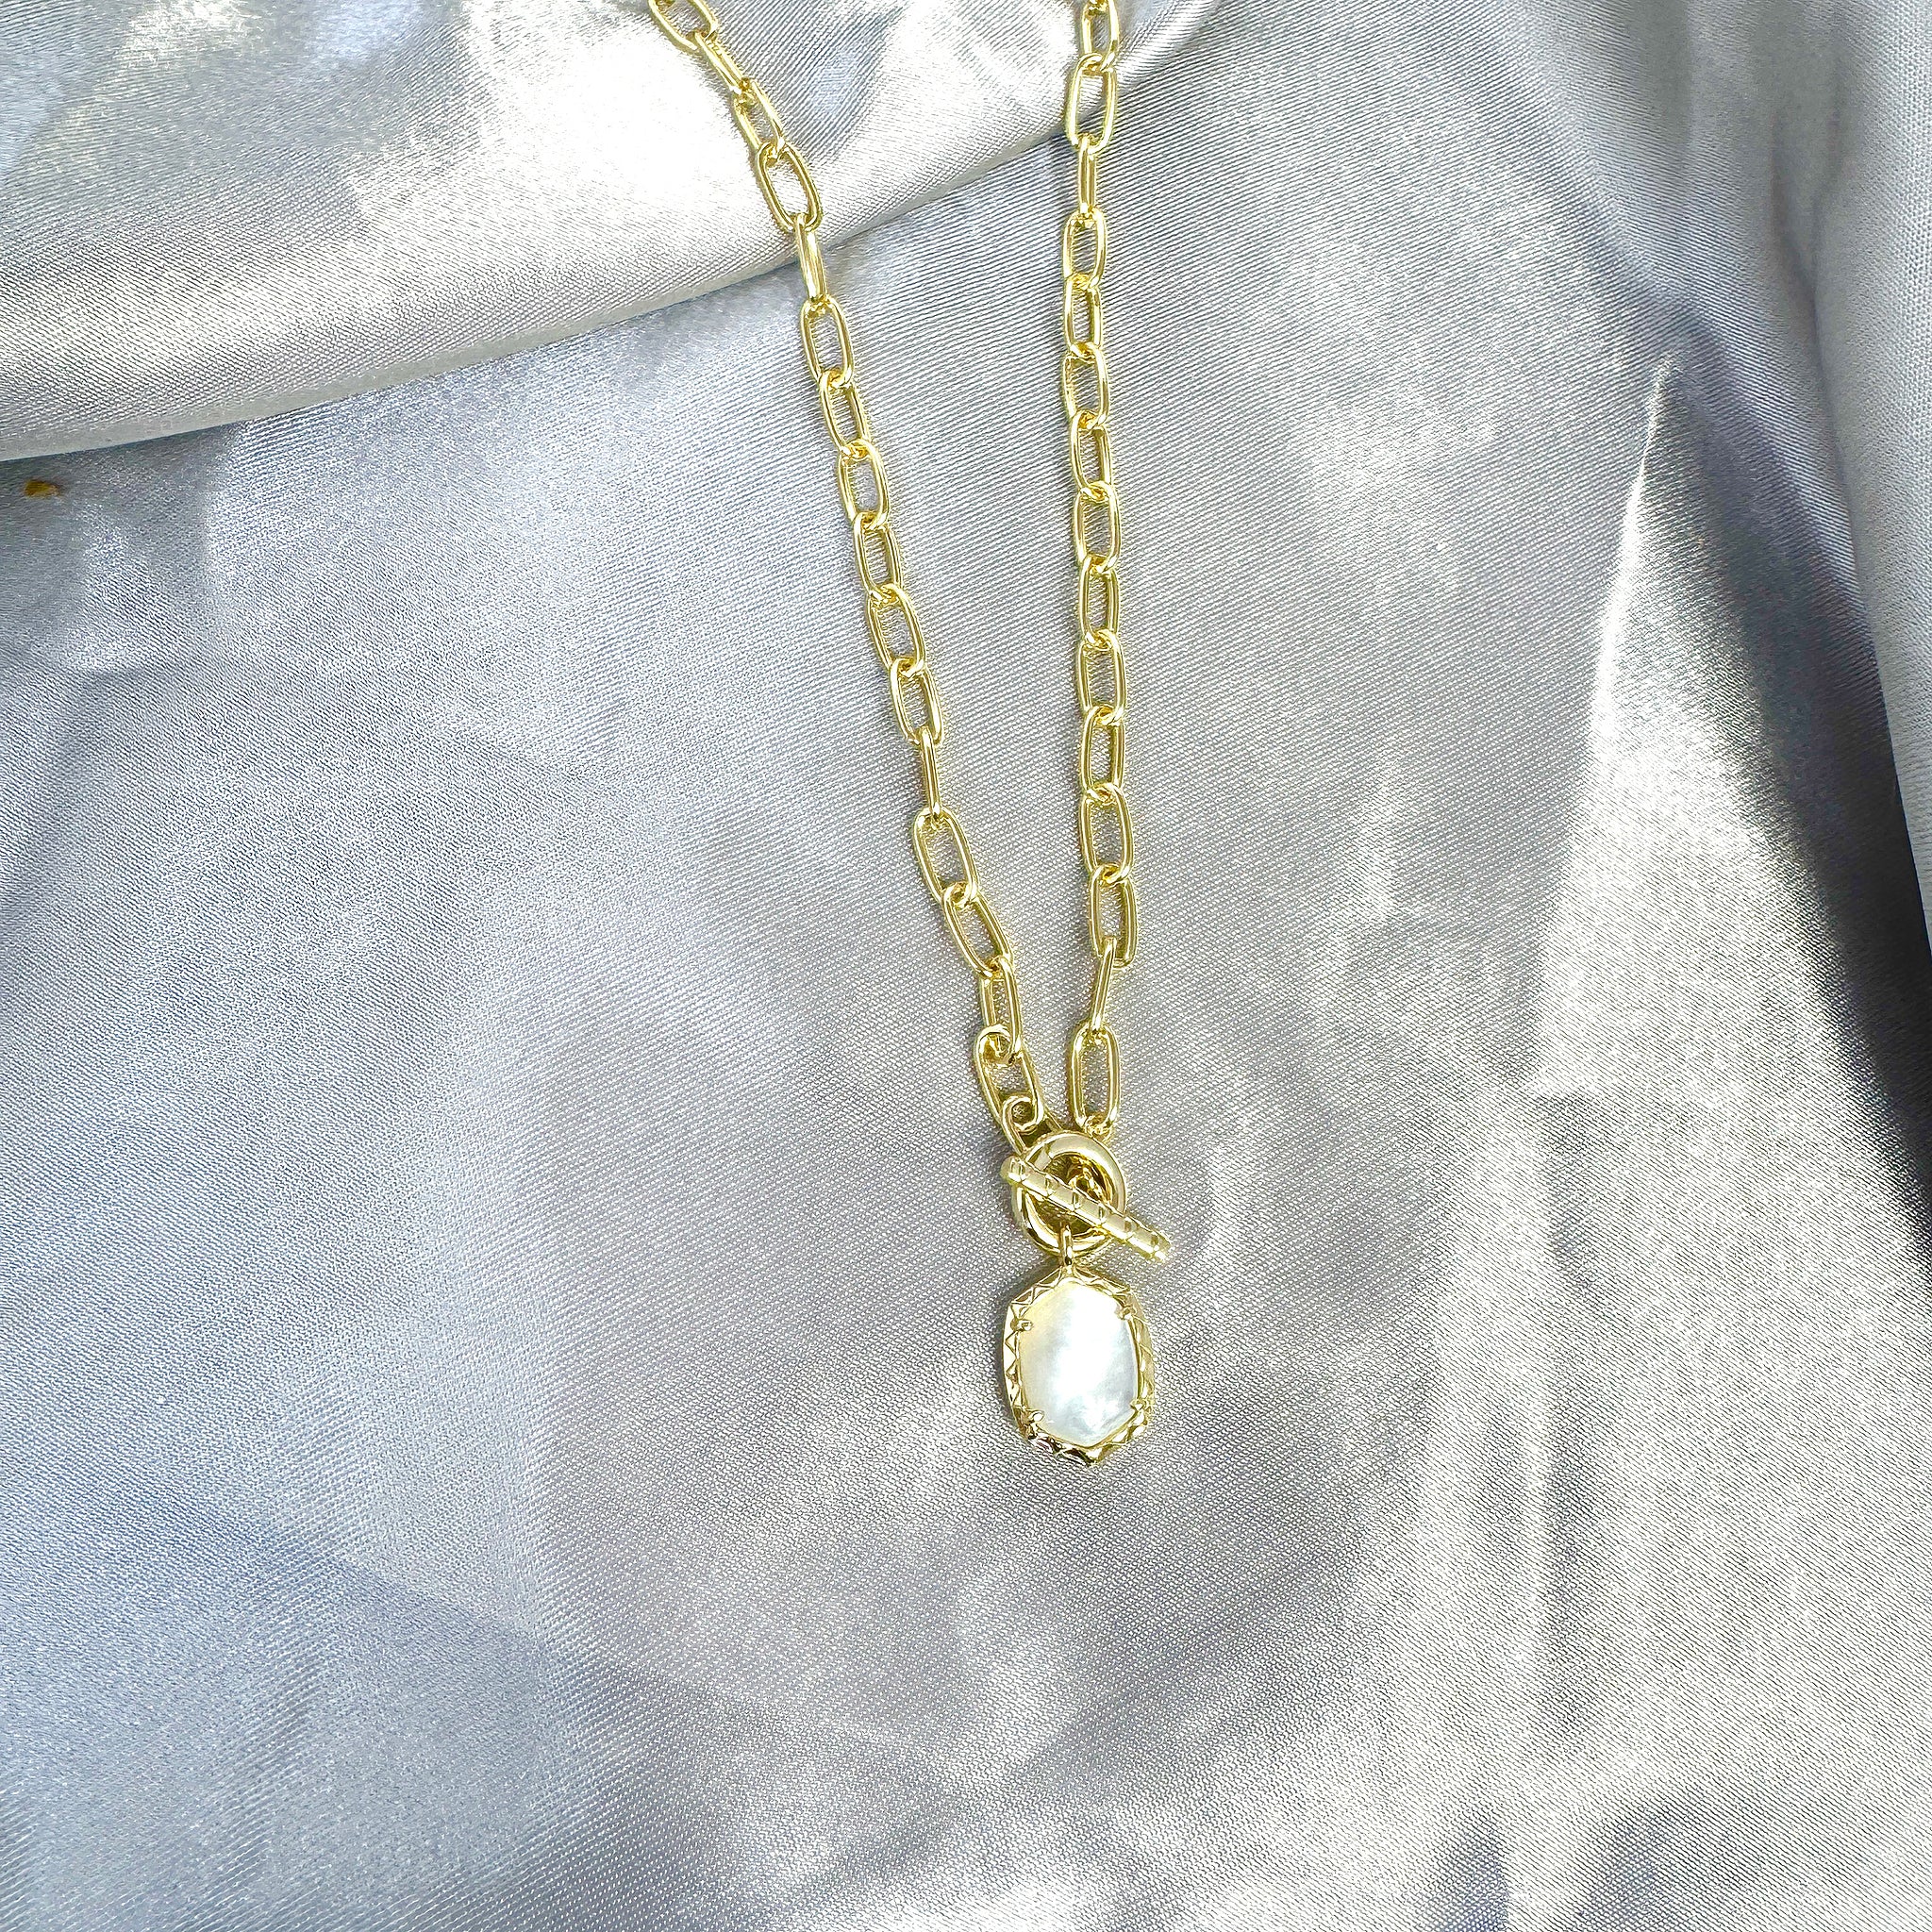 Kendra Scott Daphne Chain Link Pendant Necklace in Ivory Mother of Pearl and Gold